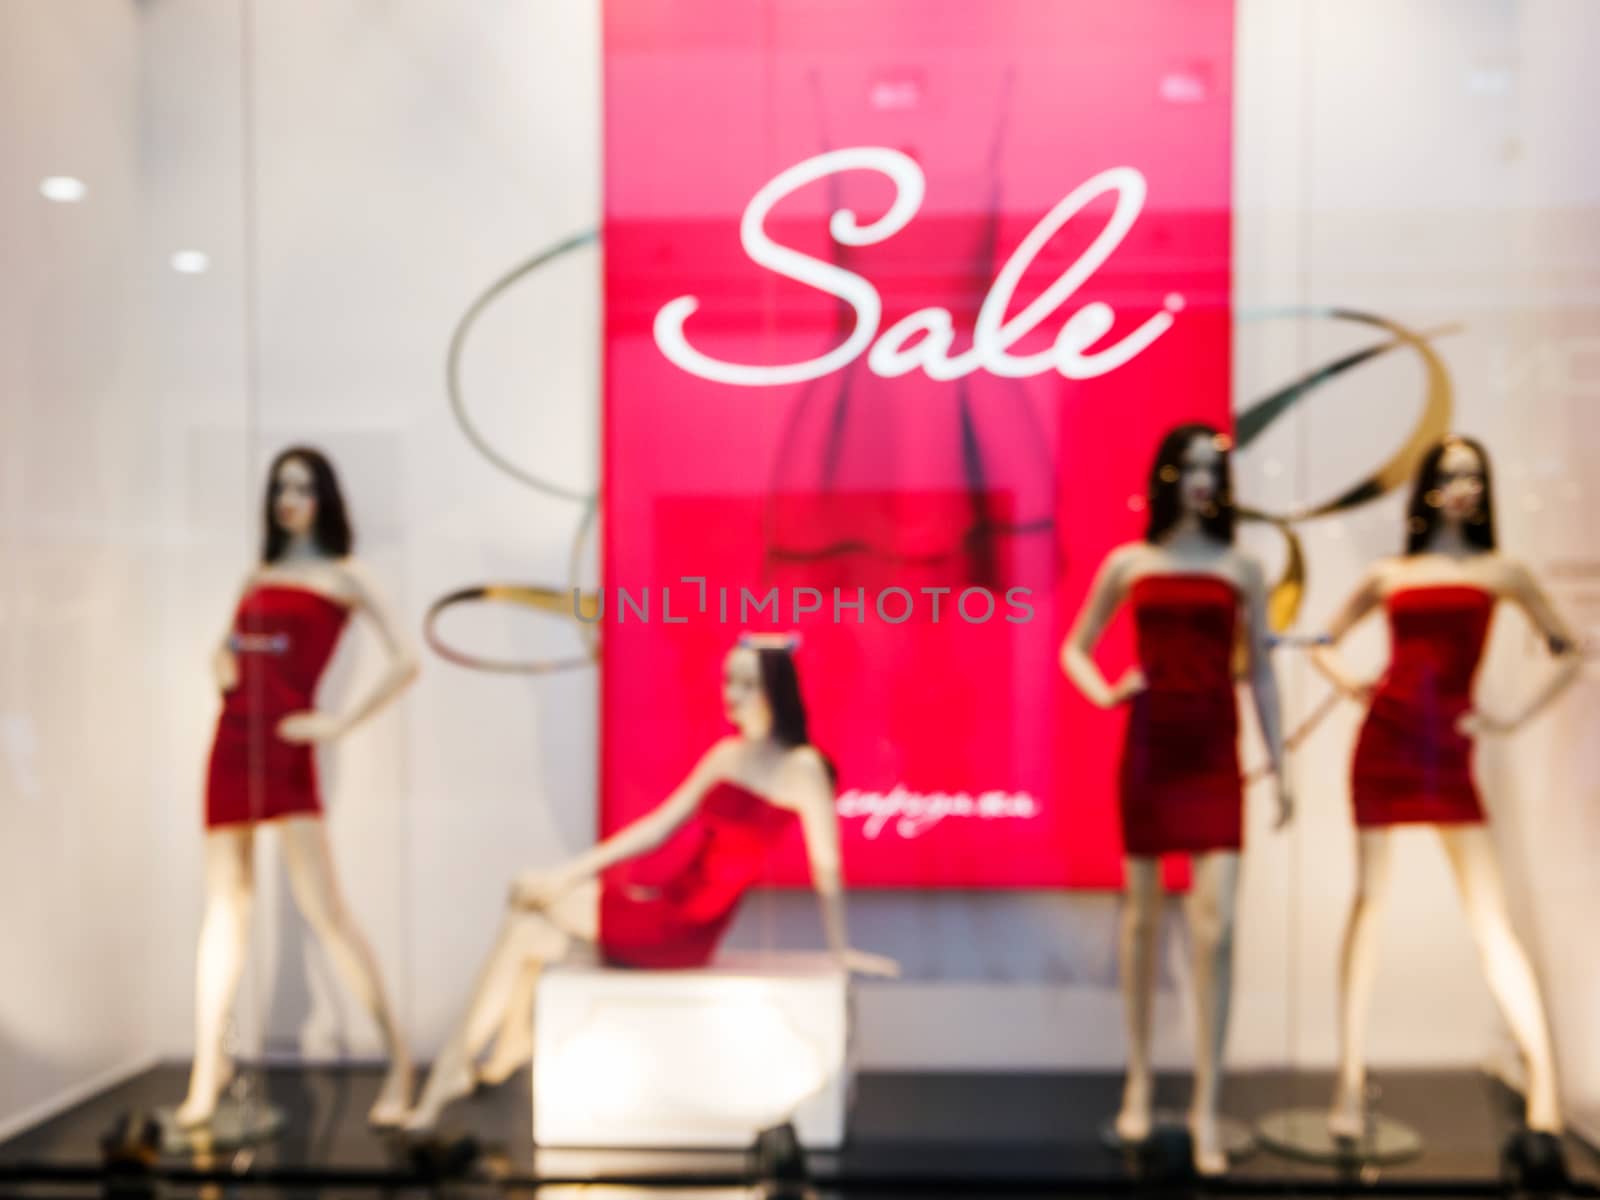 Blur window display with mannequins and text Sale by fascinadora